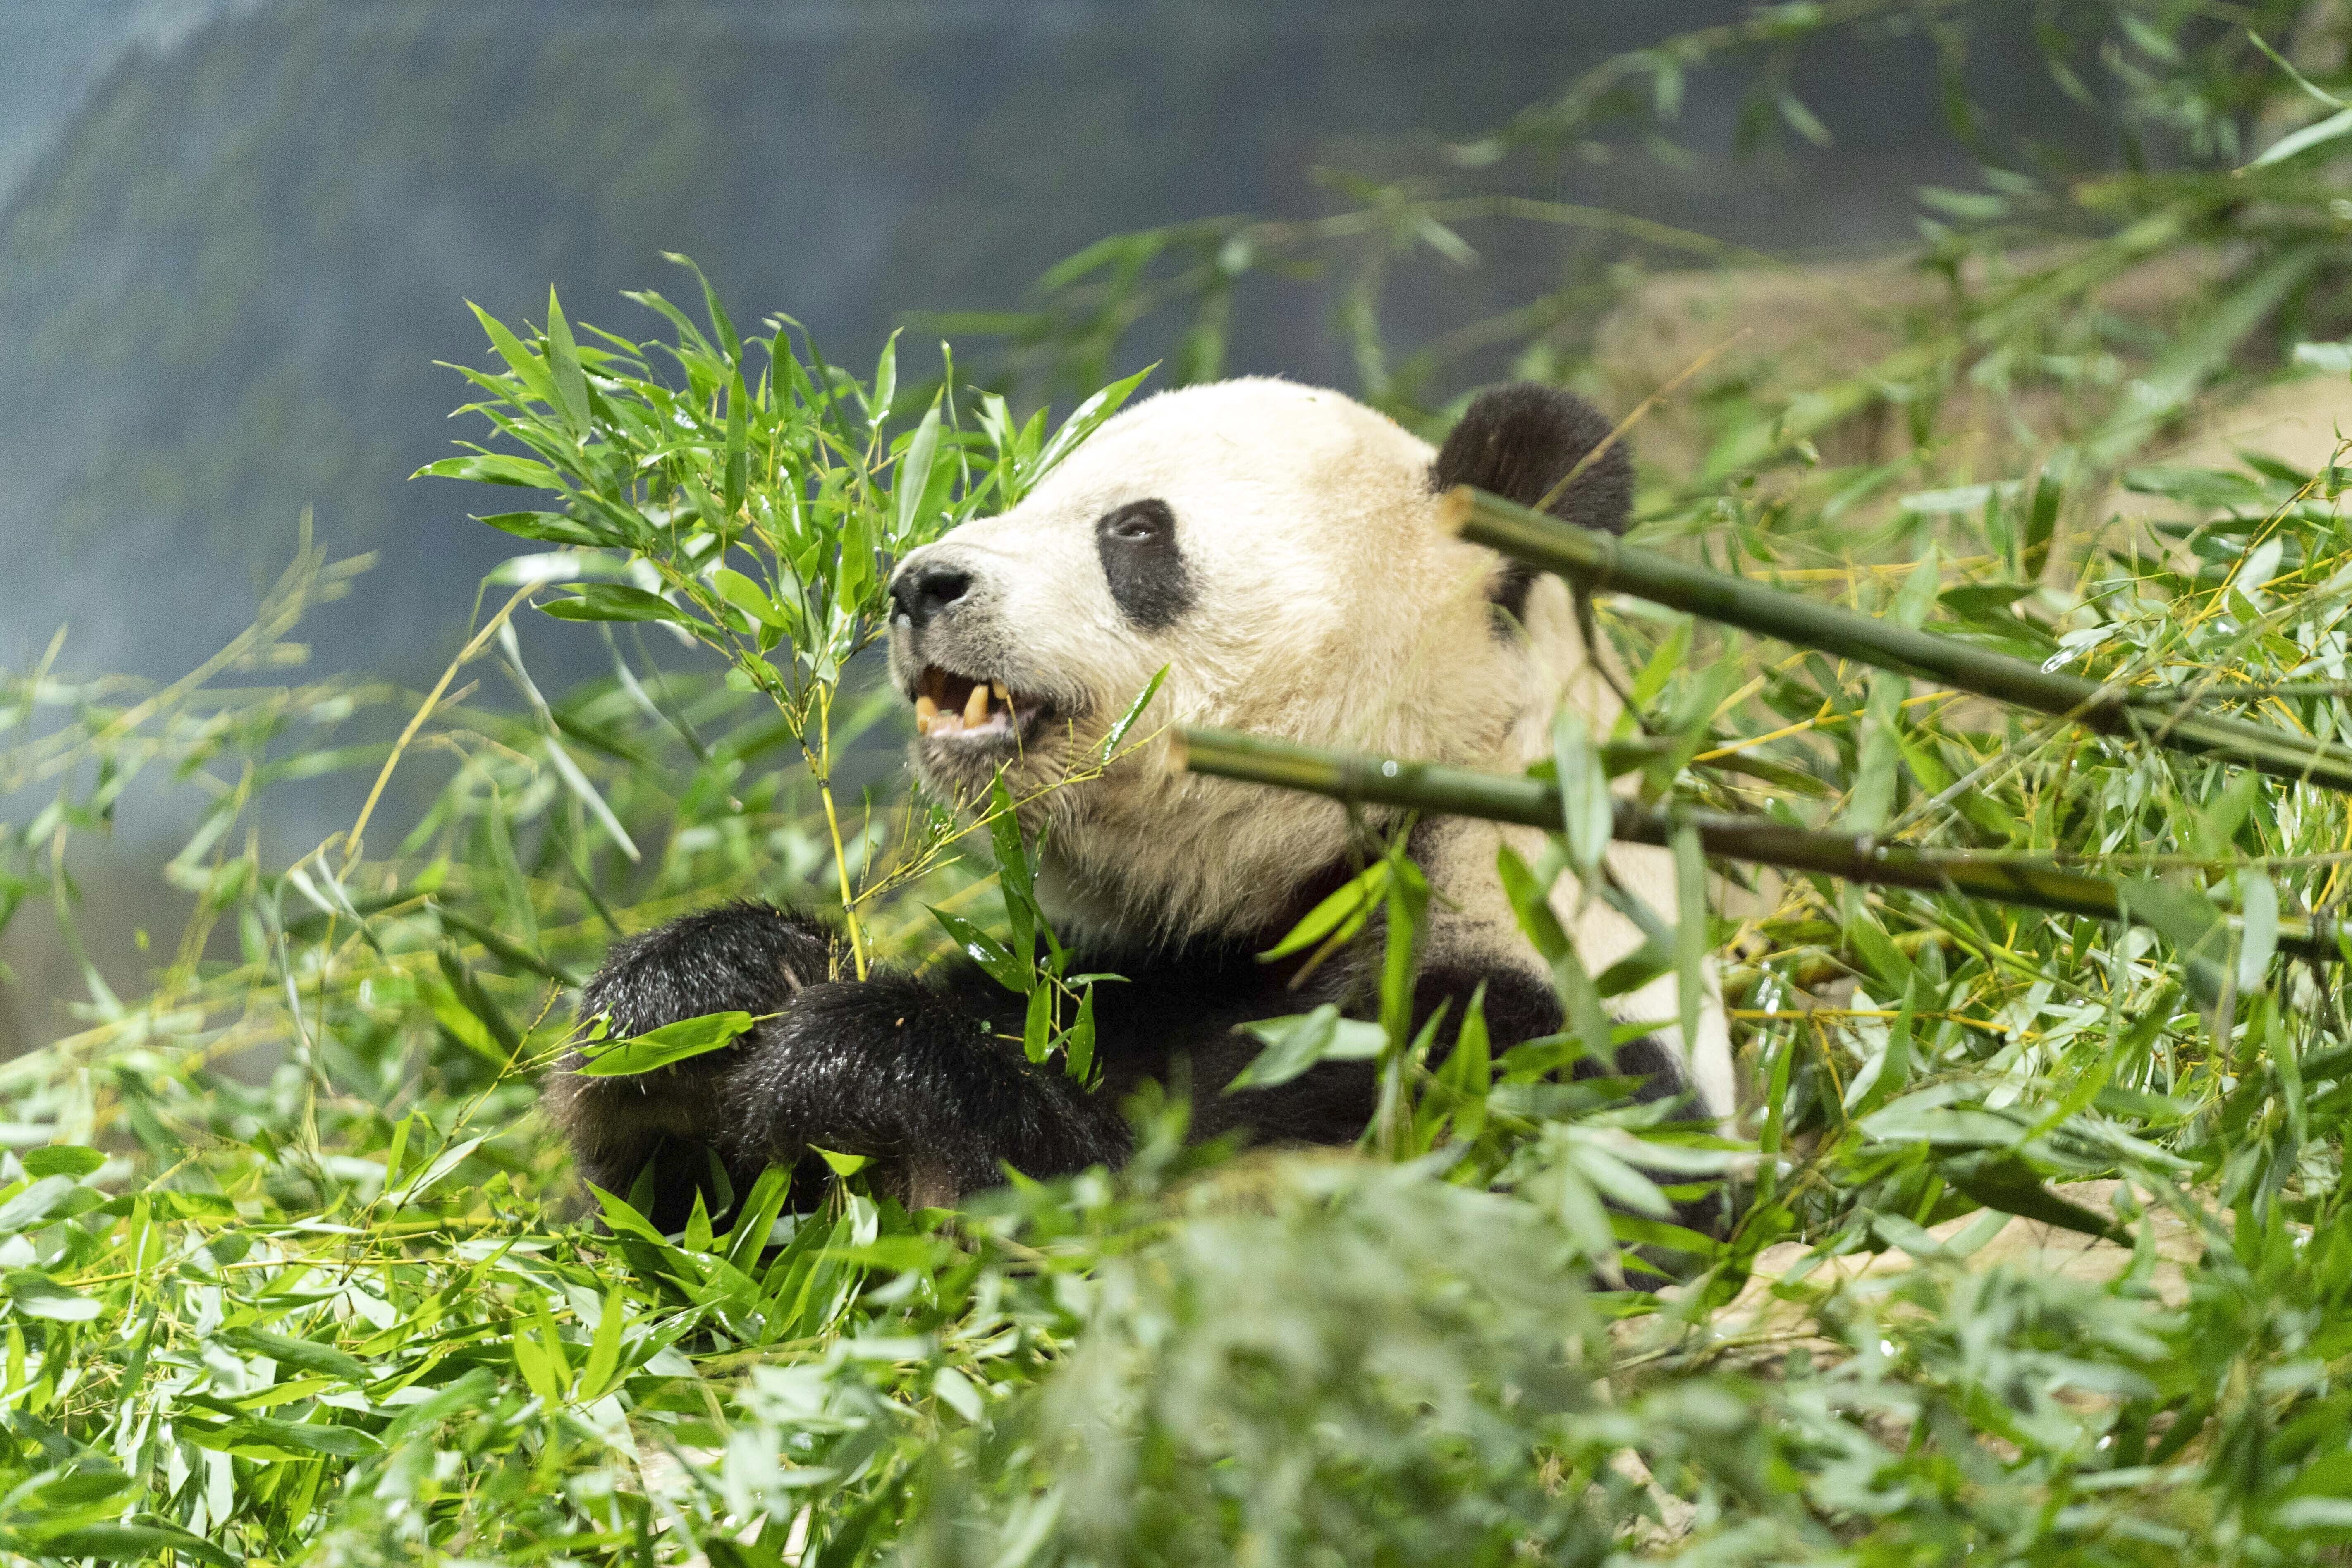 The Pandas Will Leave The National Zoo By Mid-November